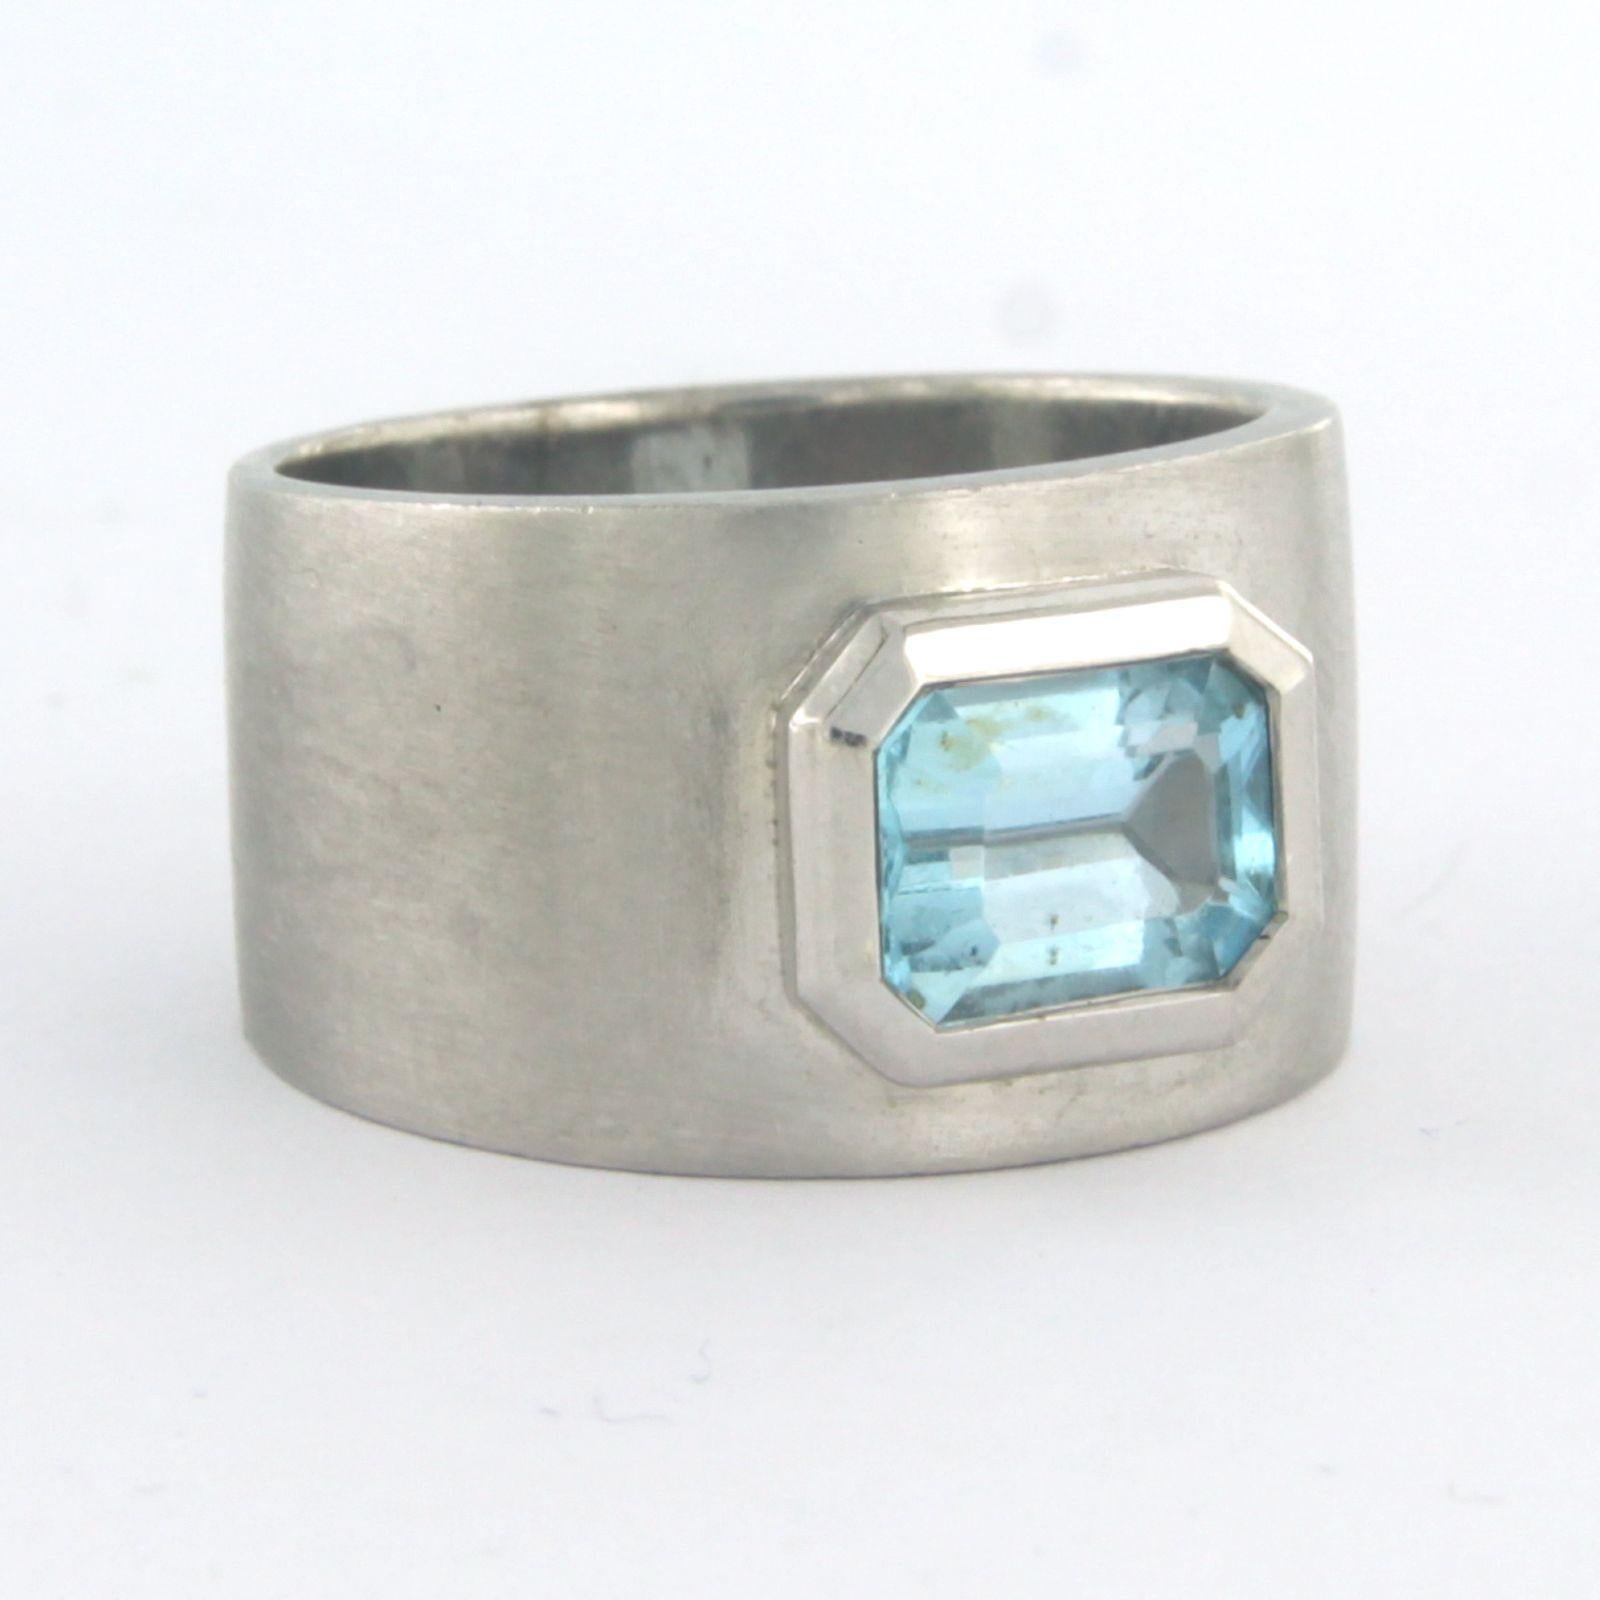 18k white gold ring with aquamarine up to 1.05 ct - ring size U.S. 7.25 - EU 17.5(55)

Detailed description

the top of the ring is 1.2 cm wide and 4.2 mm high

Ring size US 7.25 - EU 17.5(55), ring can be enlarged or reduced a few sizes at cost